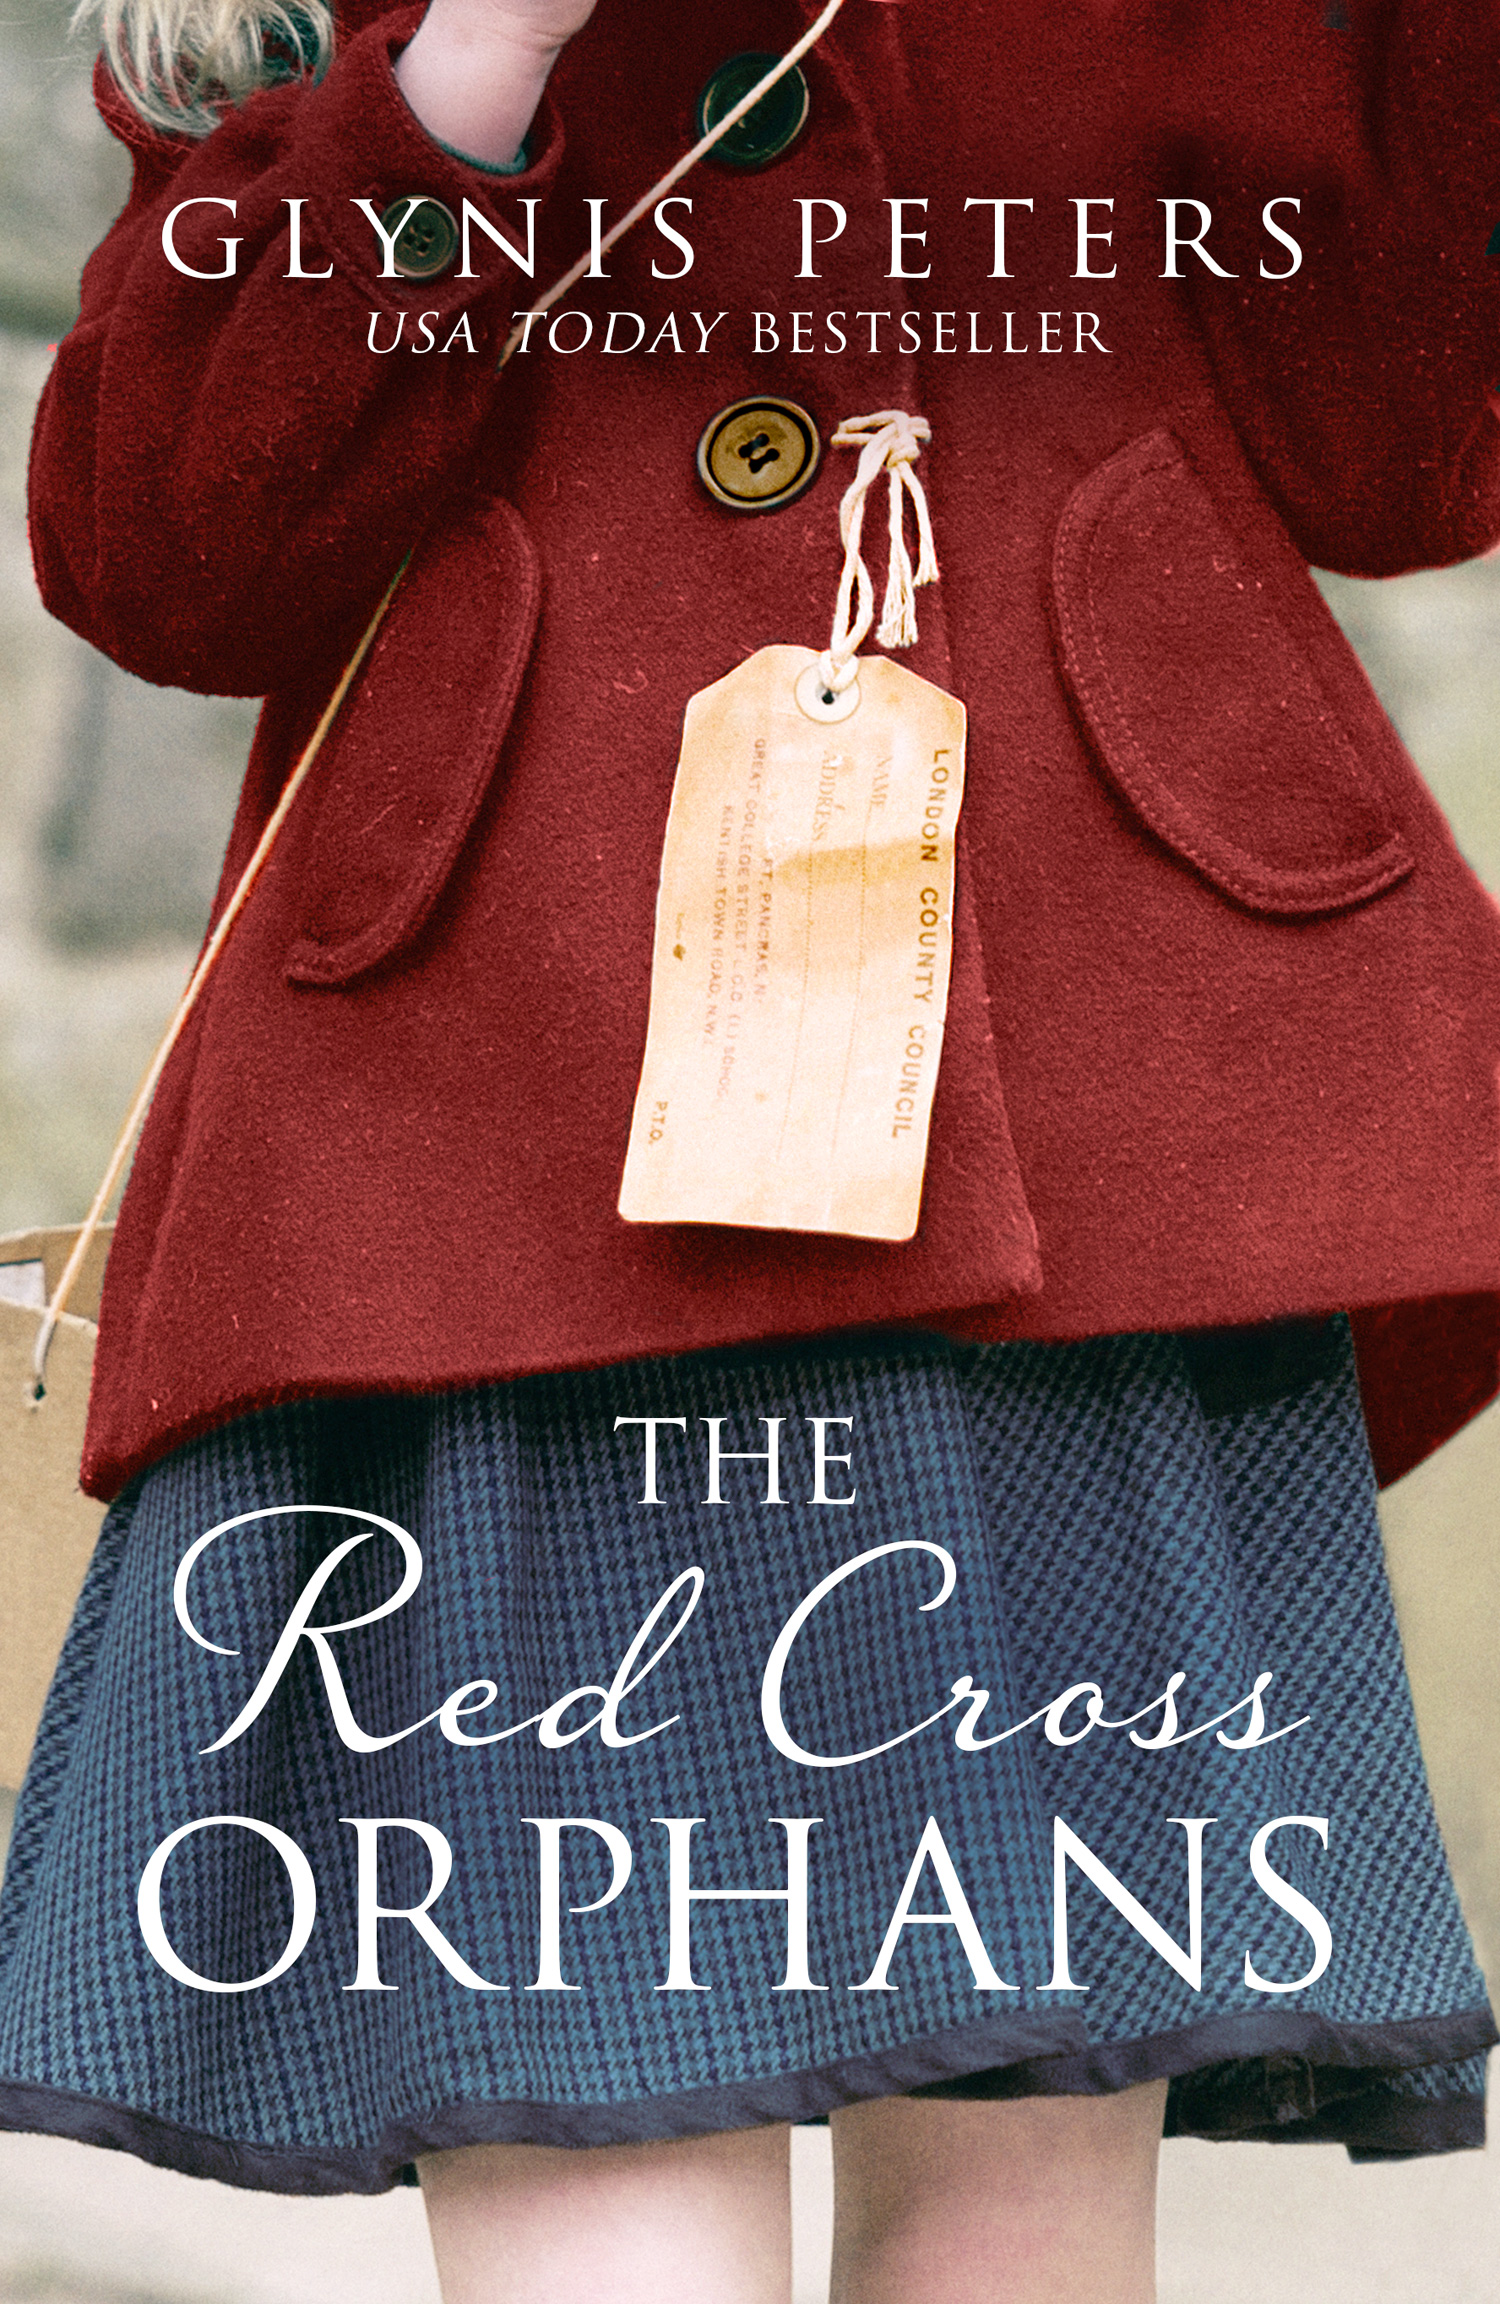 The Red Cross Orphans (The Red Cross Orphans, Book 1) cover image